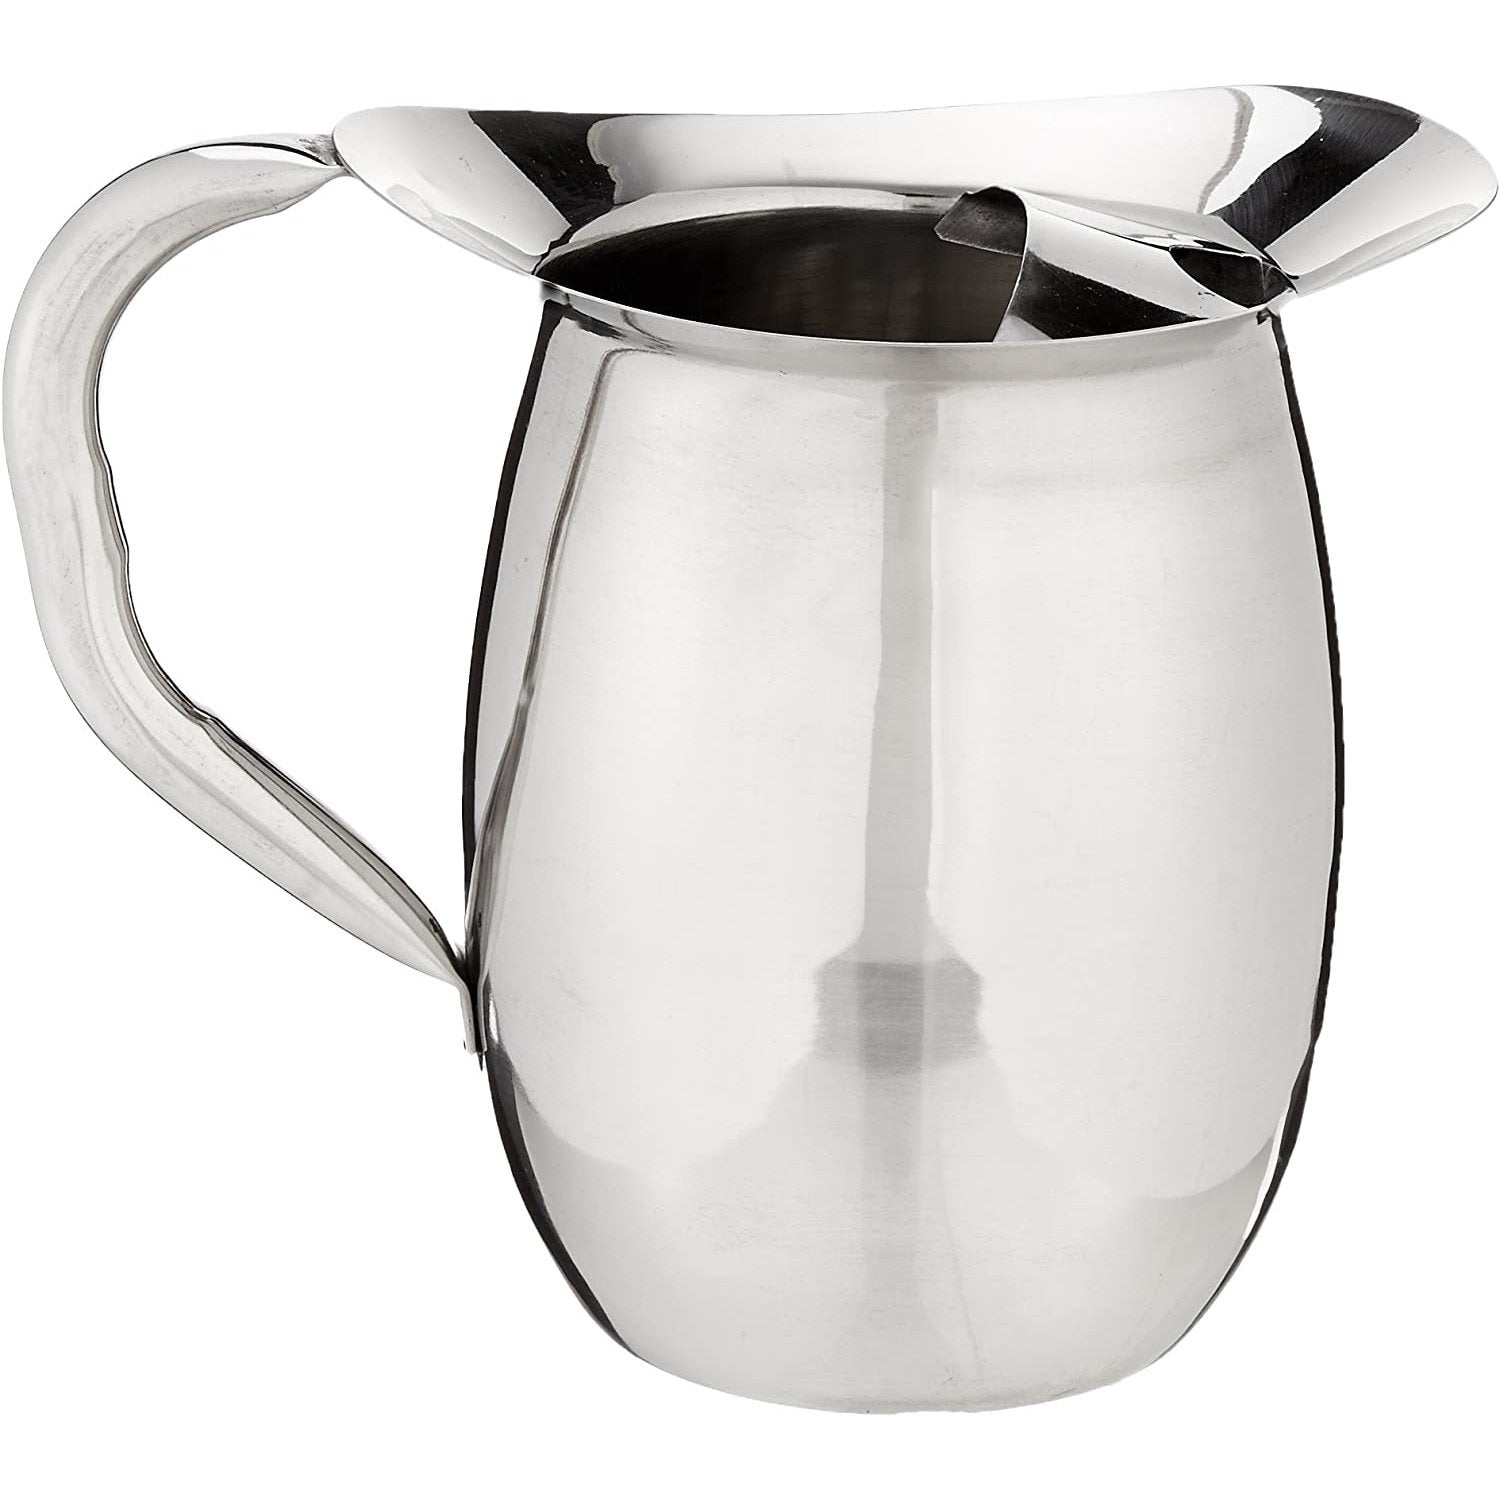 Winco WPB-2C Deluxe Bell Pitcher with Ice Catcher, 2-Quart, Stainless Steel